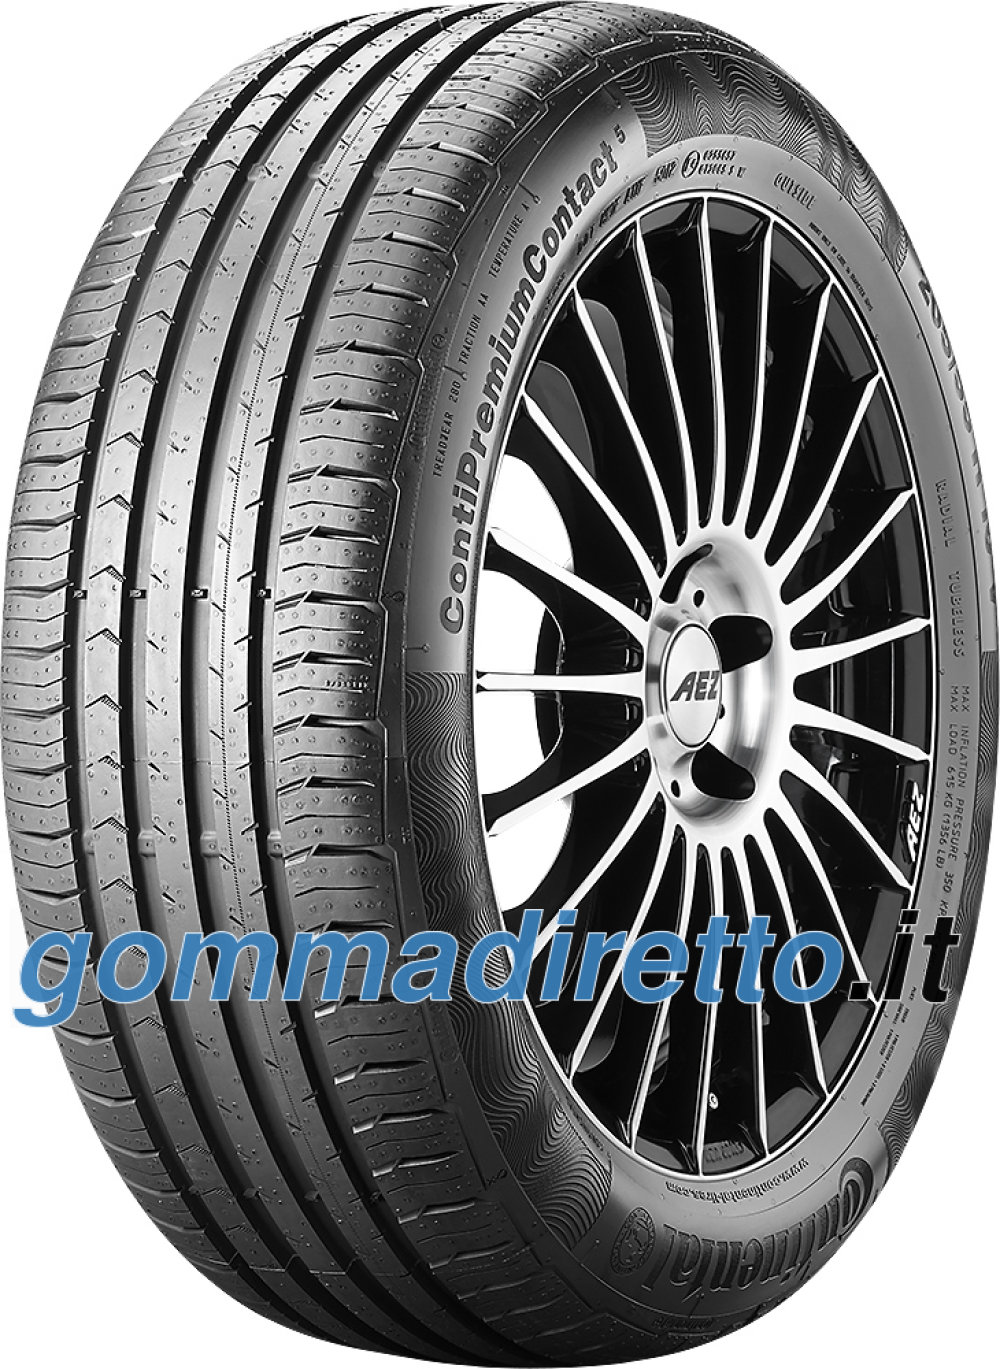 Image of        Continental ContiPremiumContact 5 ( 185/70 R14 88H )